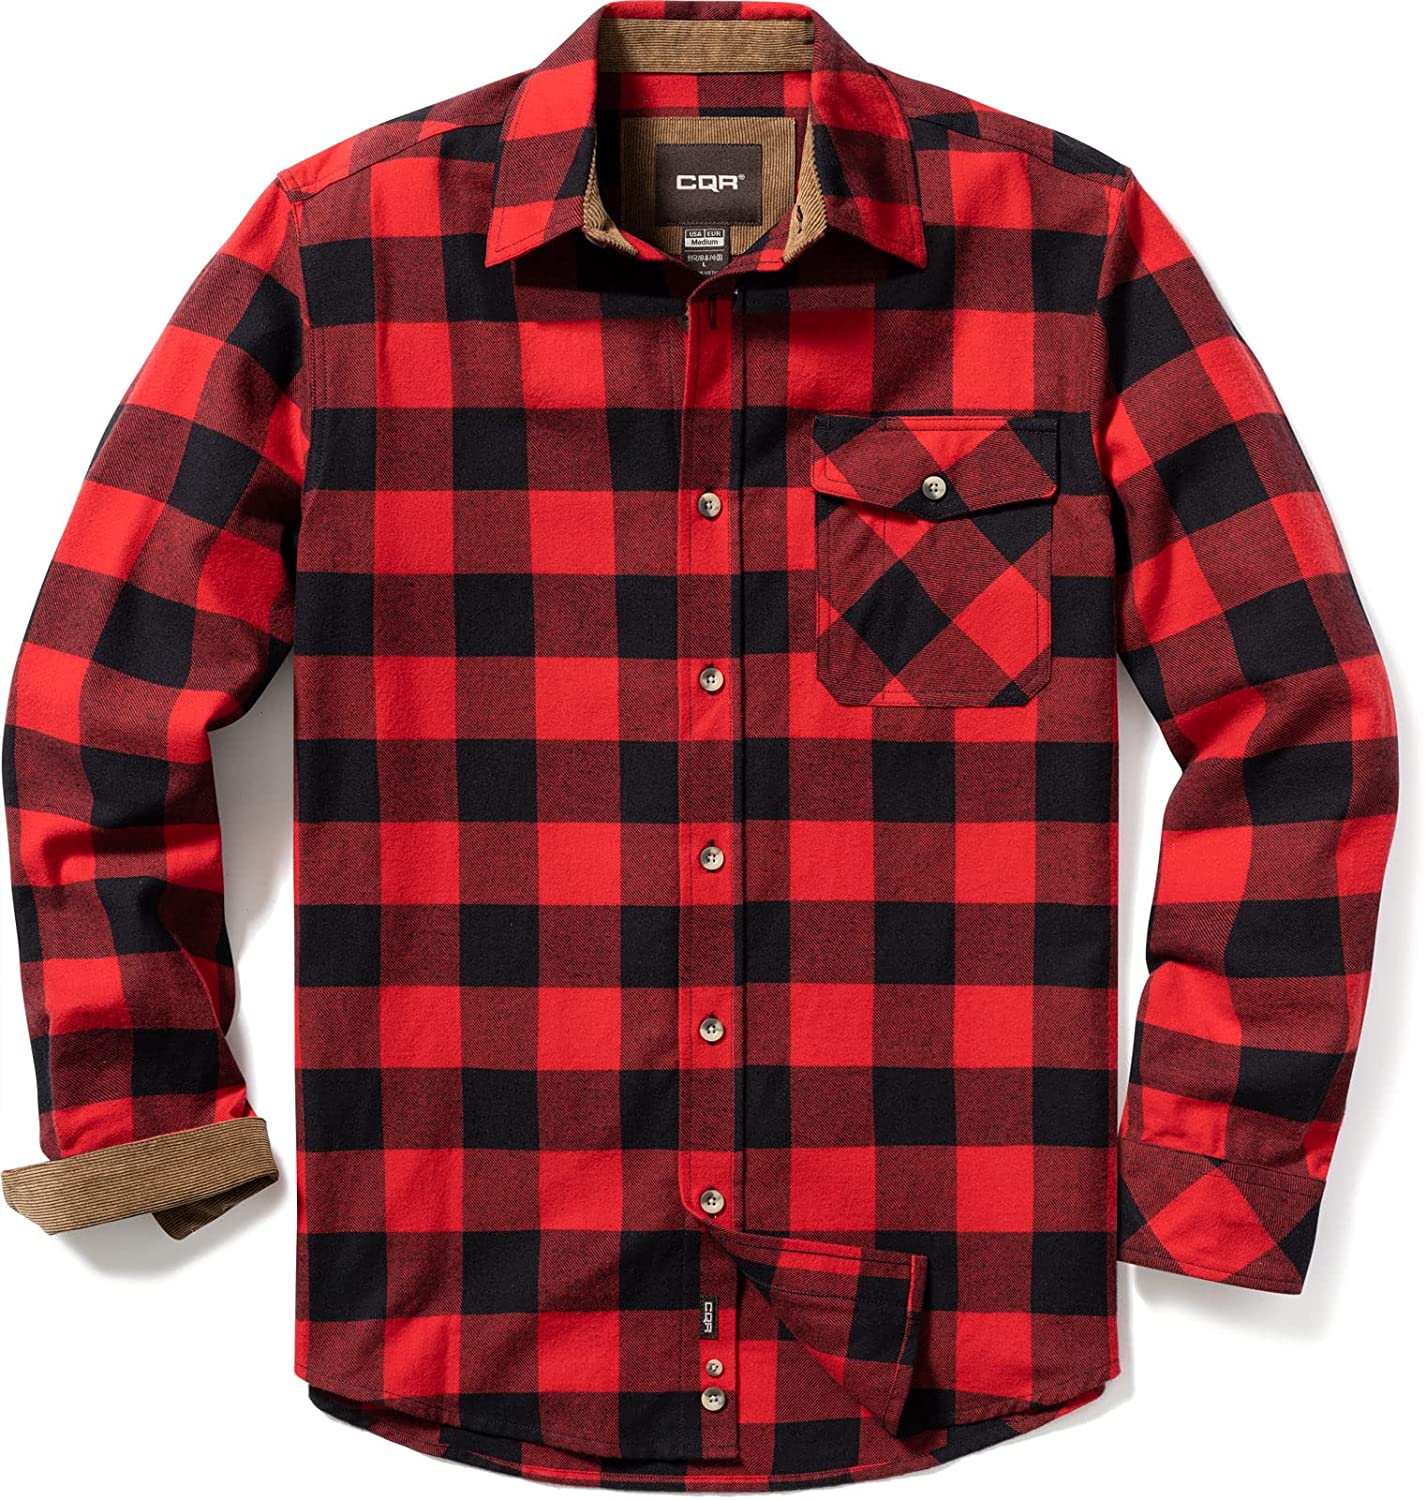 CQR Men's All Cotton Flannel Shirt, Long Sleeve Casual Button Up Plaid Shirt, Brushed Soft Outdoor Shirts